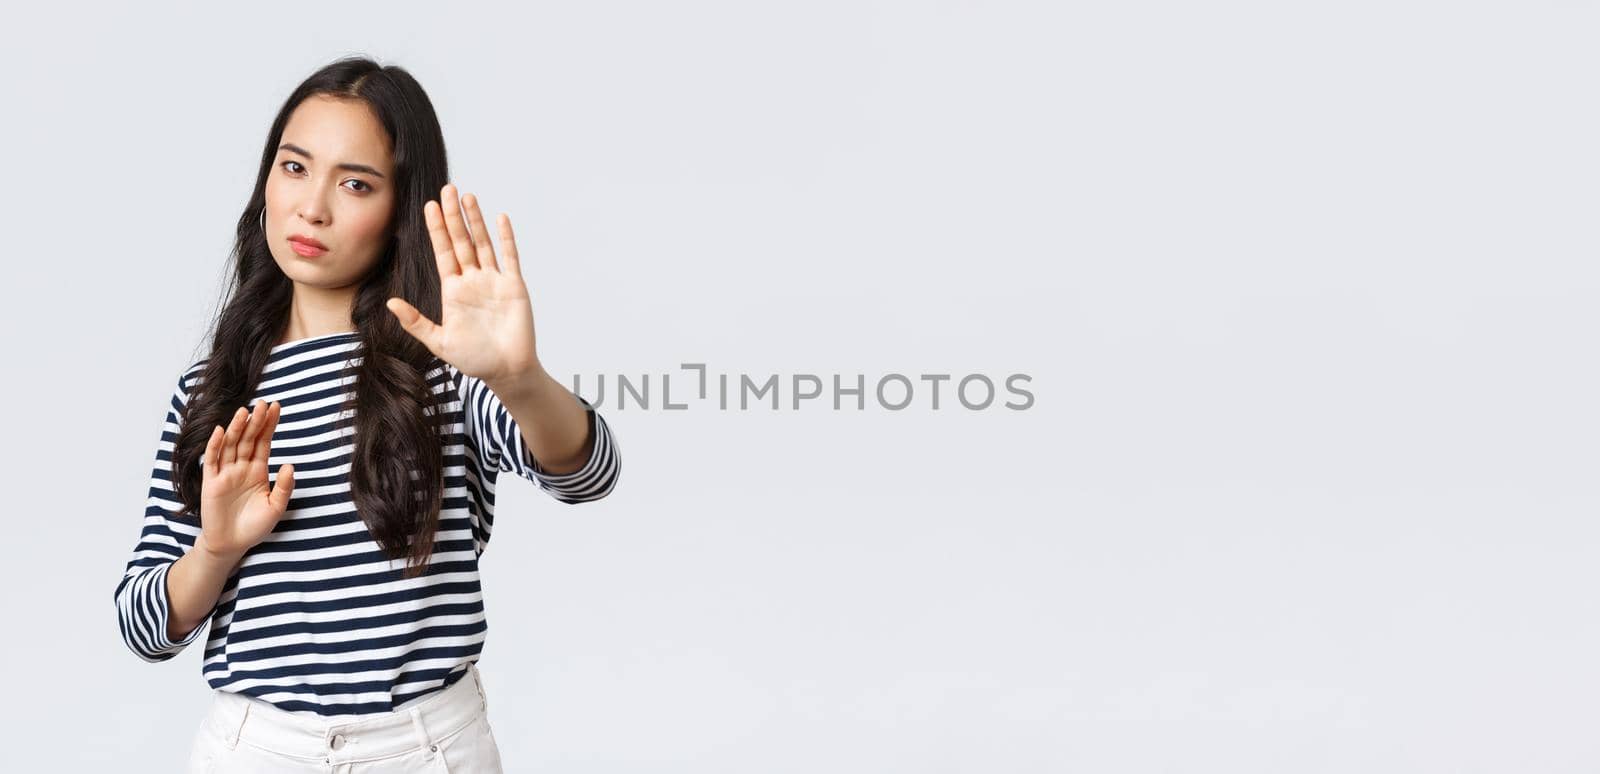 Lifestyle, beauty and fashion, people emotions concept. Annoyed woman feeling uncomfortable being photographed, asking turn-off camera, raising hands up defensive, protecting face from flashlight.